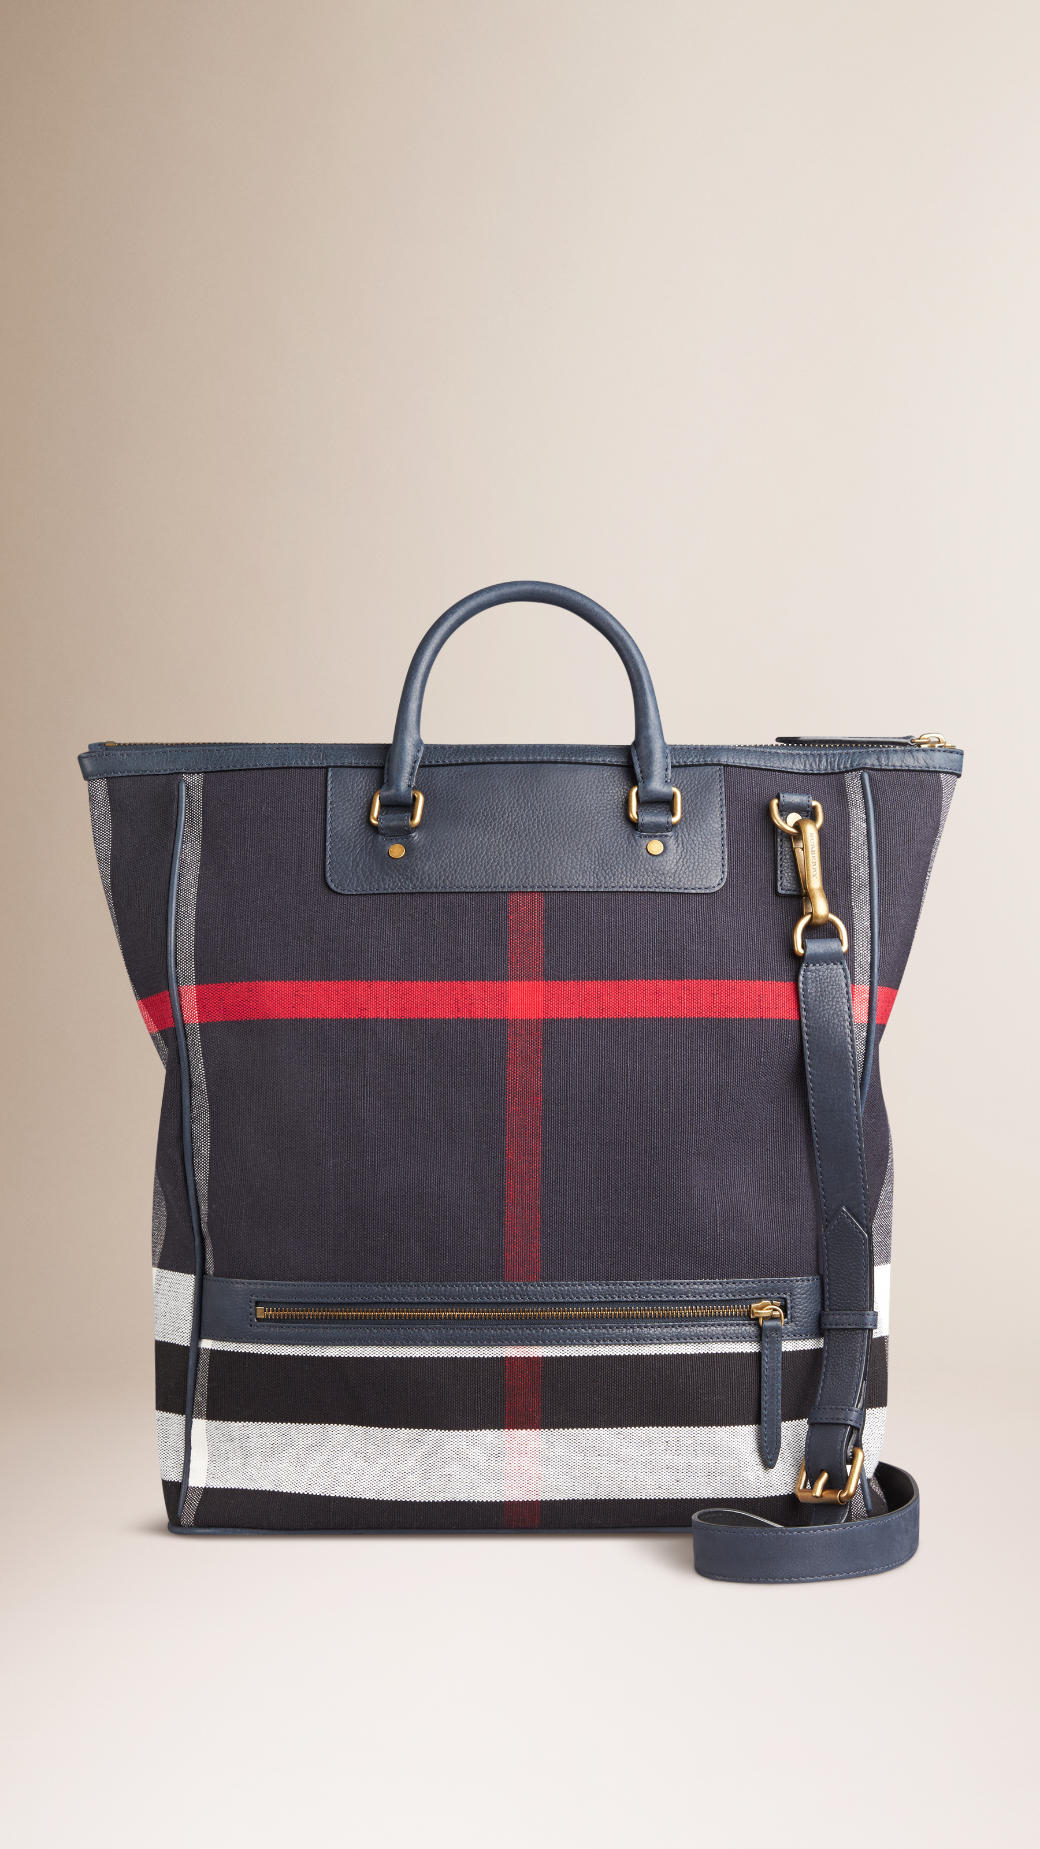 Lyst - Burberry Large Canvas Check And Leather Tote Bag in Blue for Men